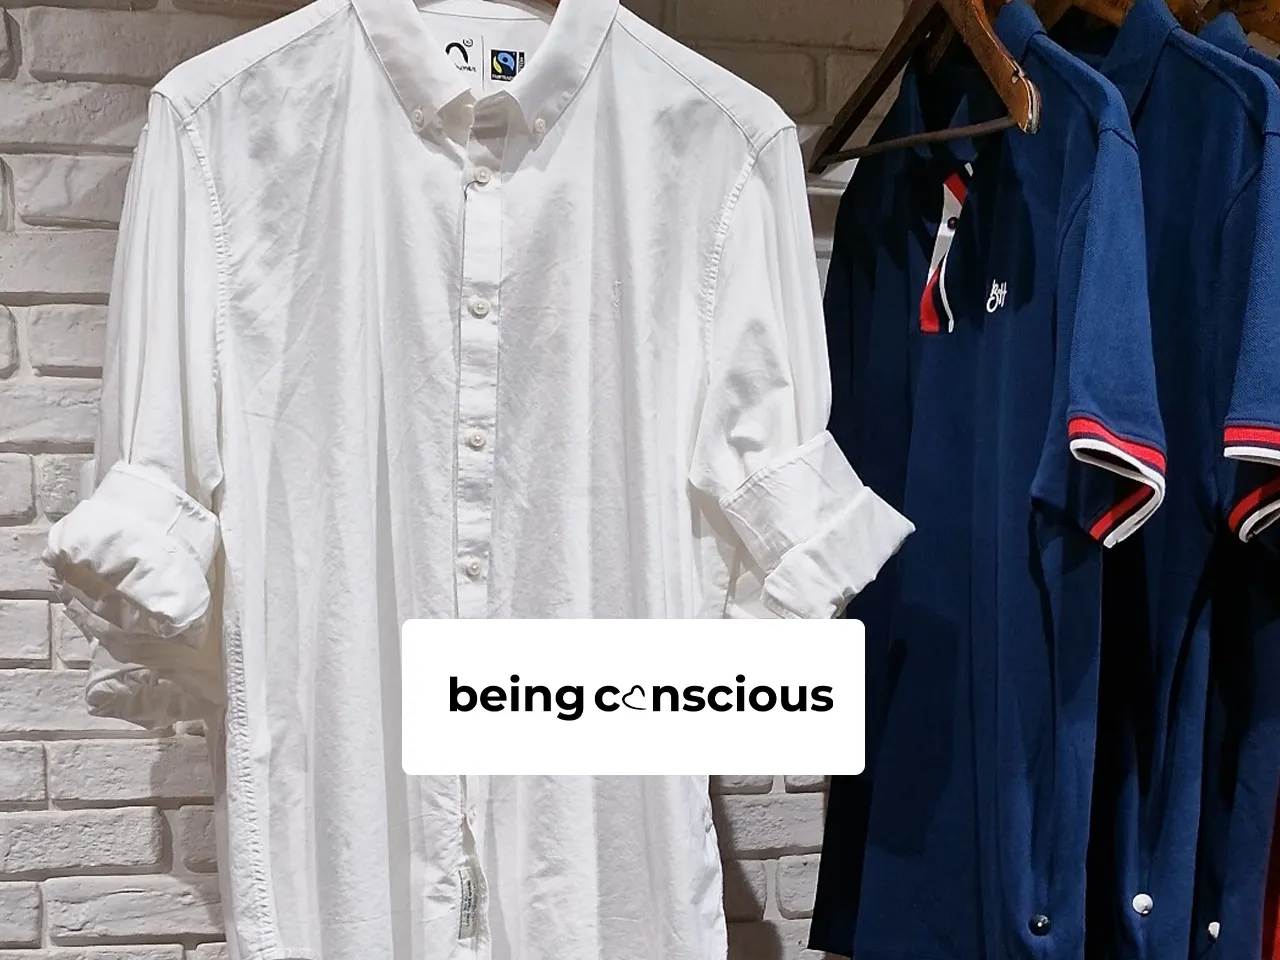 Being Human Clothing launches its ‘Being Conscious’ Range in partnership with Fairtrade India